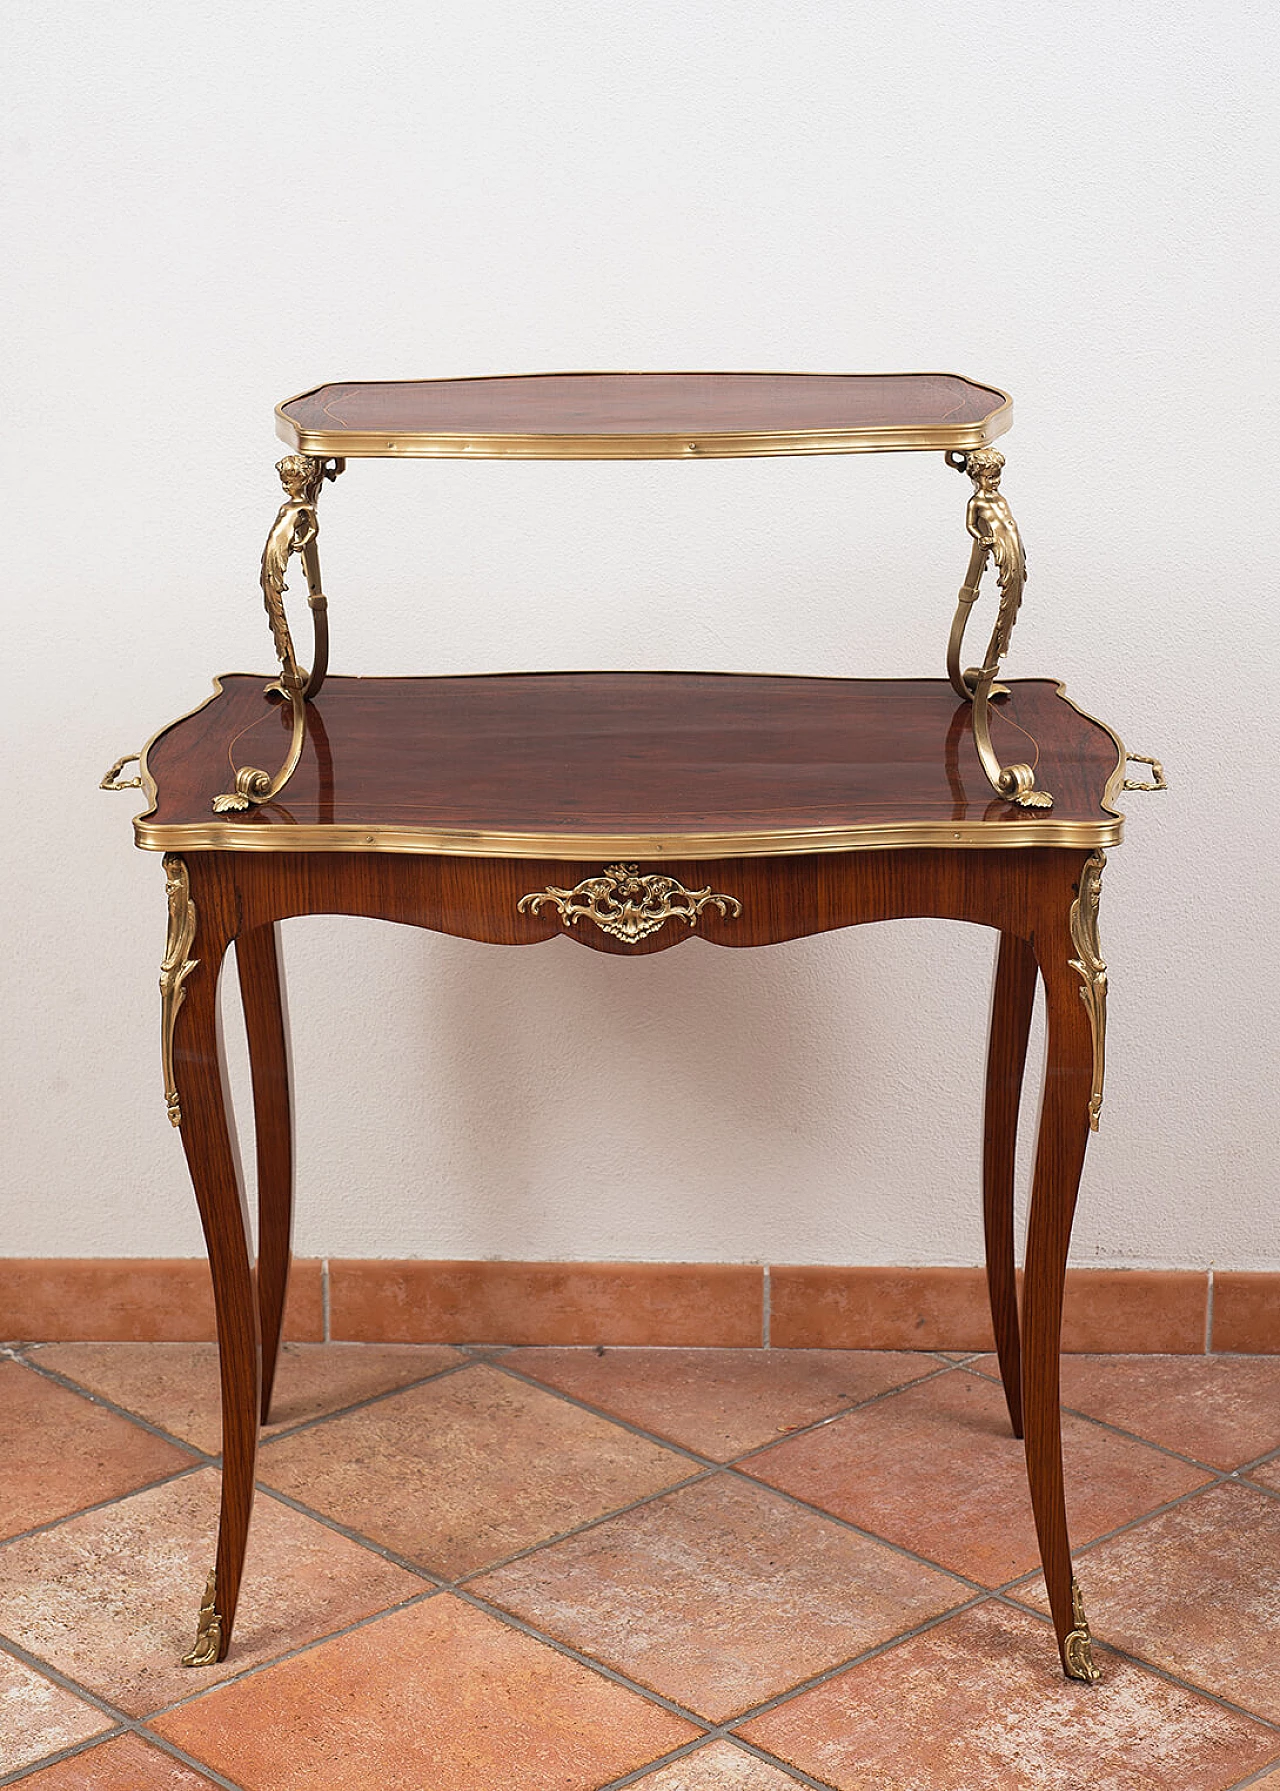 French Napoleon III coffee table in polychrome wood with gilded bronze applications, 19th century 1395516